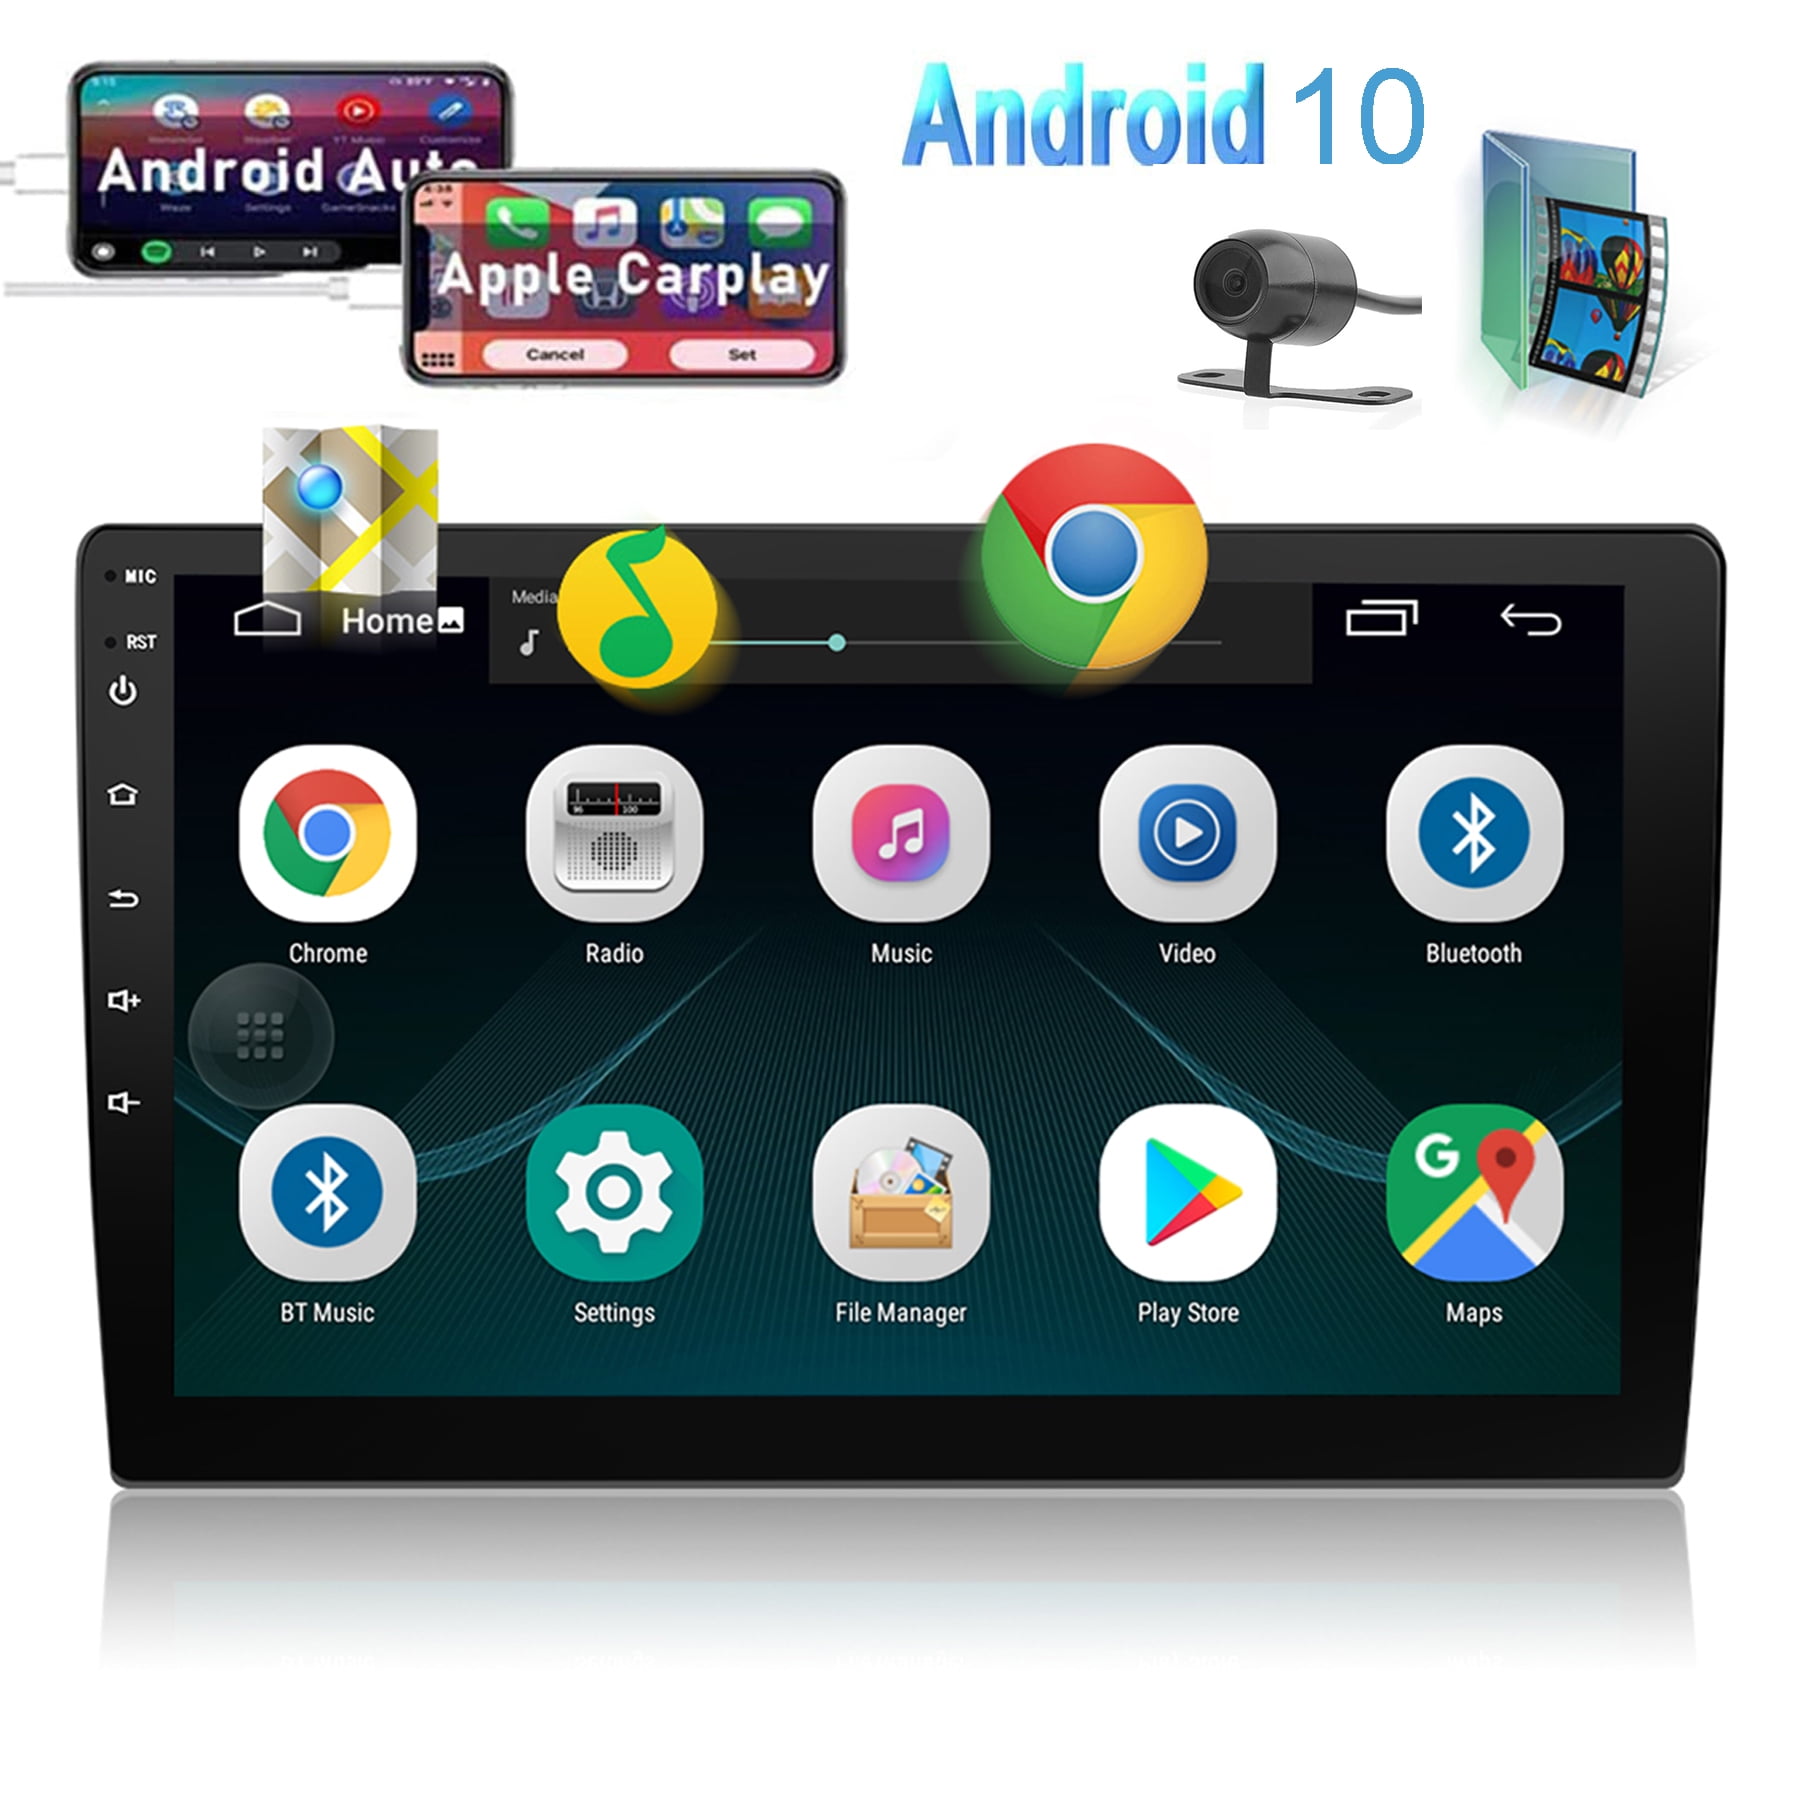 Afleiden Luchten Verhuizer 10.1 Inch Android 10 Car Stereo with Apple Carplay Double Din Android Auto  Head unit GPS Navigation Touchscreen Car Autoradio Bluetooth WiFi Mirroring  CAM-IN + Free Backup Camera - Walmart.com